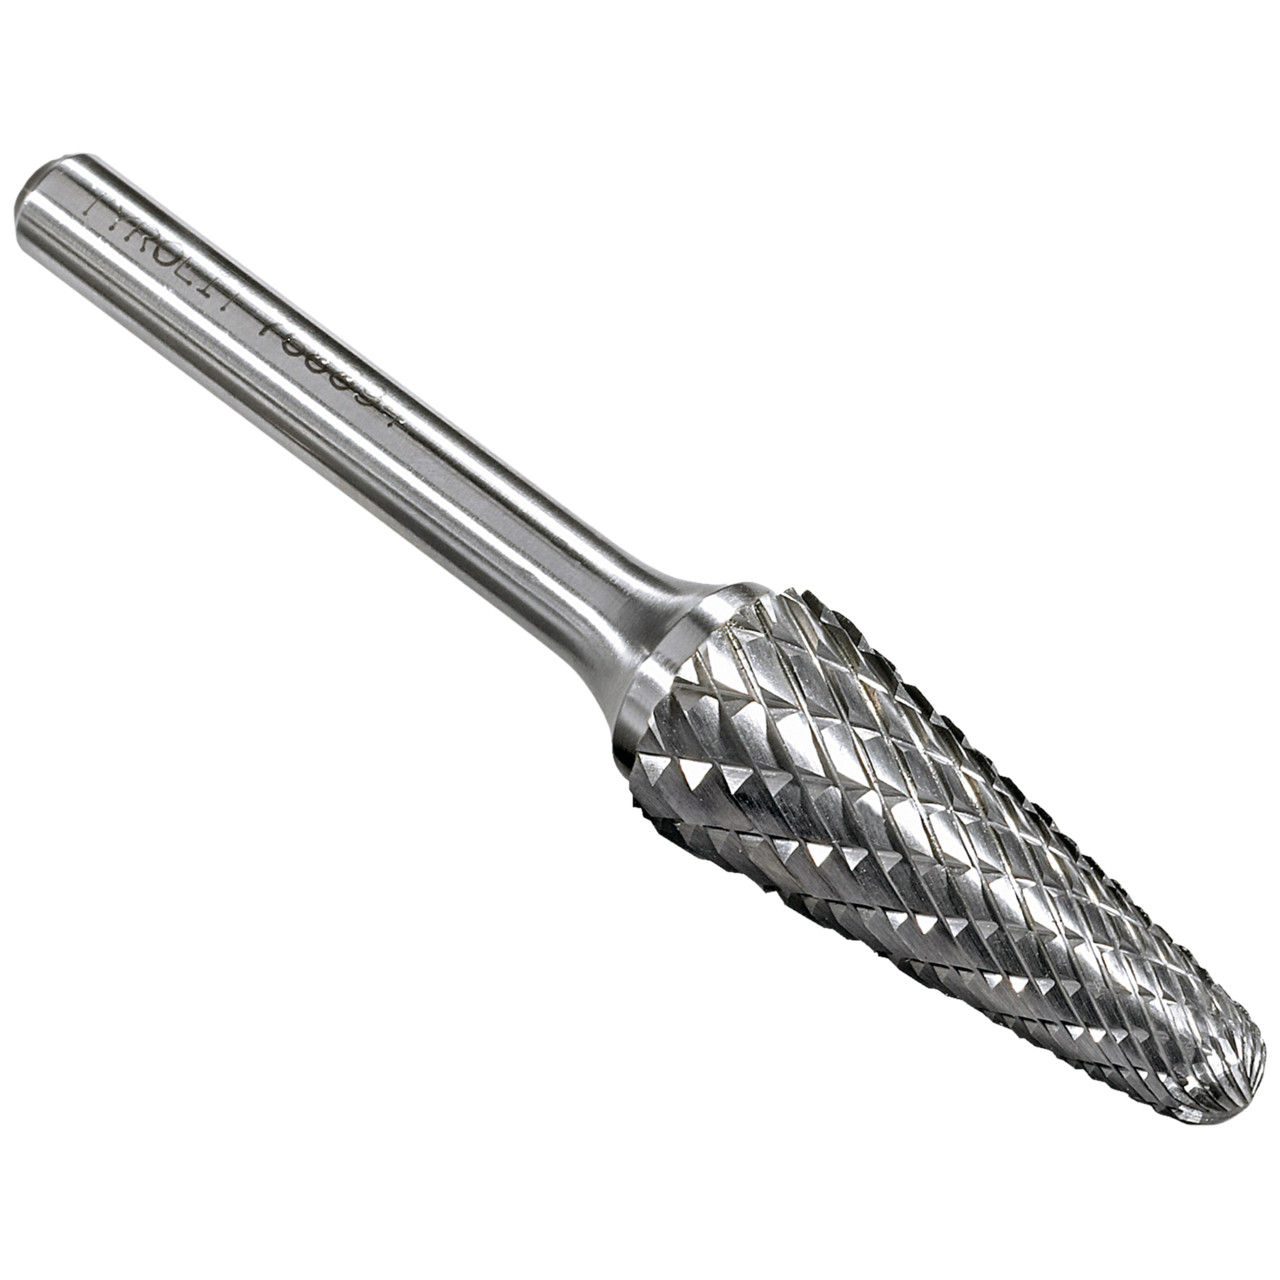 TYROLIT carbide end mill DxT-SxL 6x16-6x50 For cast iron, steel and stainless steel, shape: 52KEL - round taper, Art. 766934